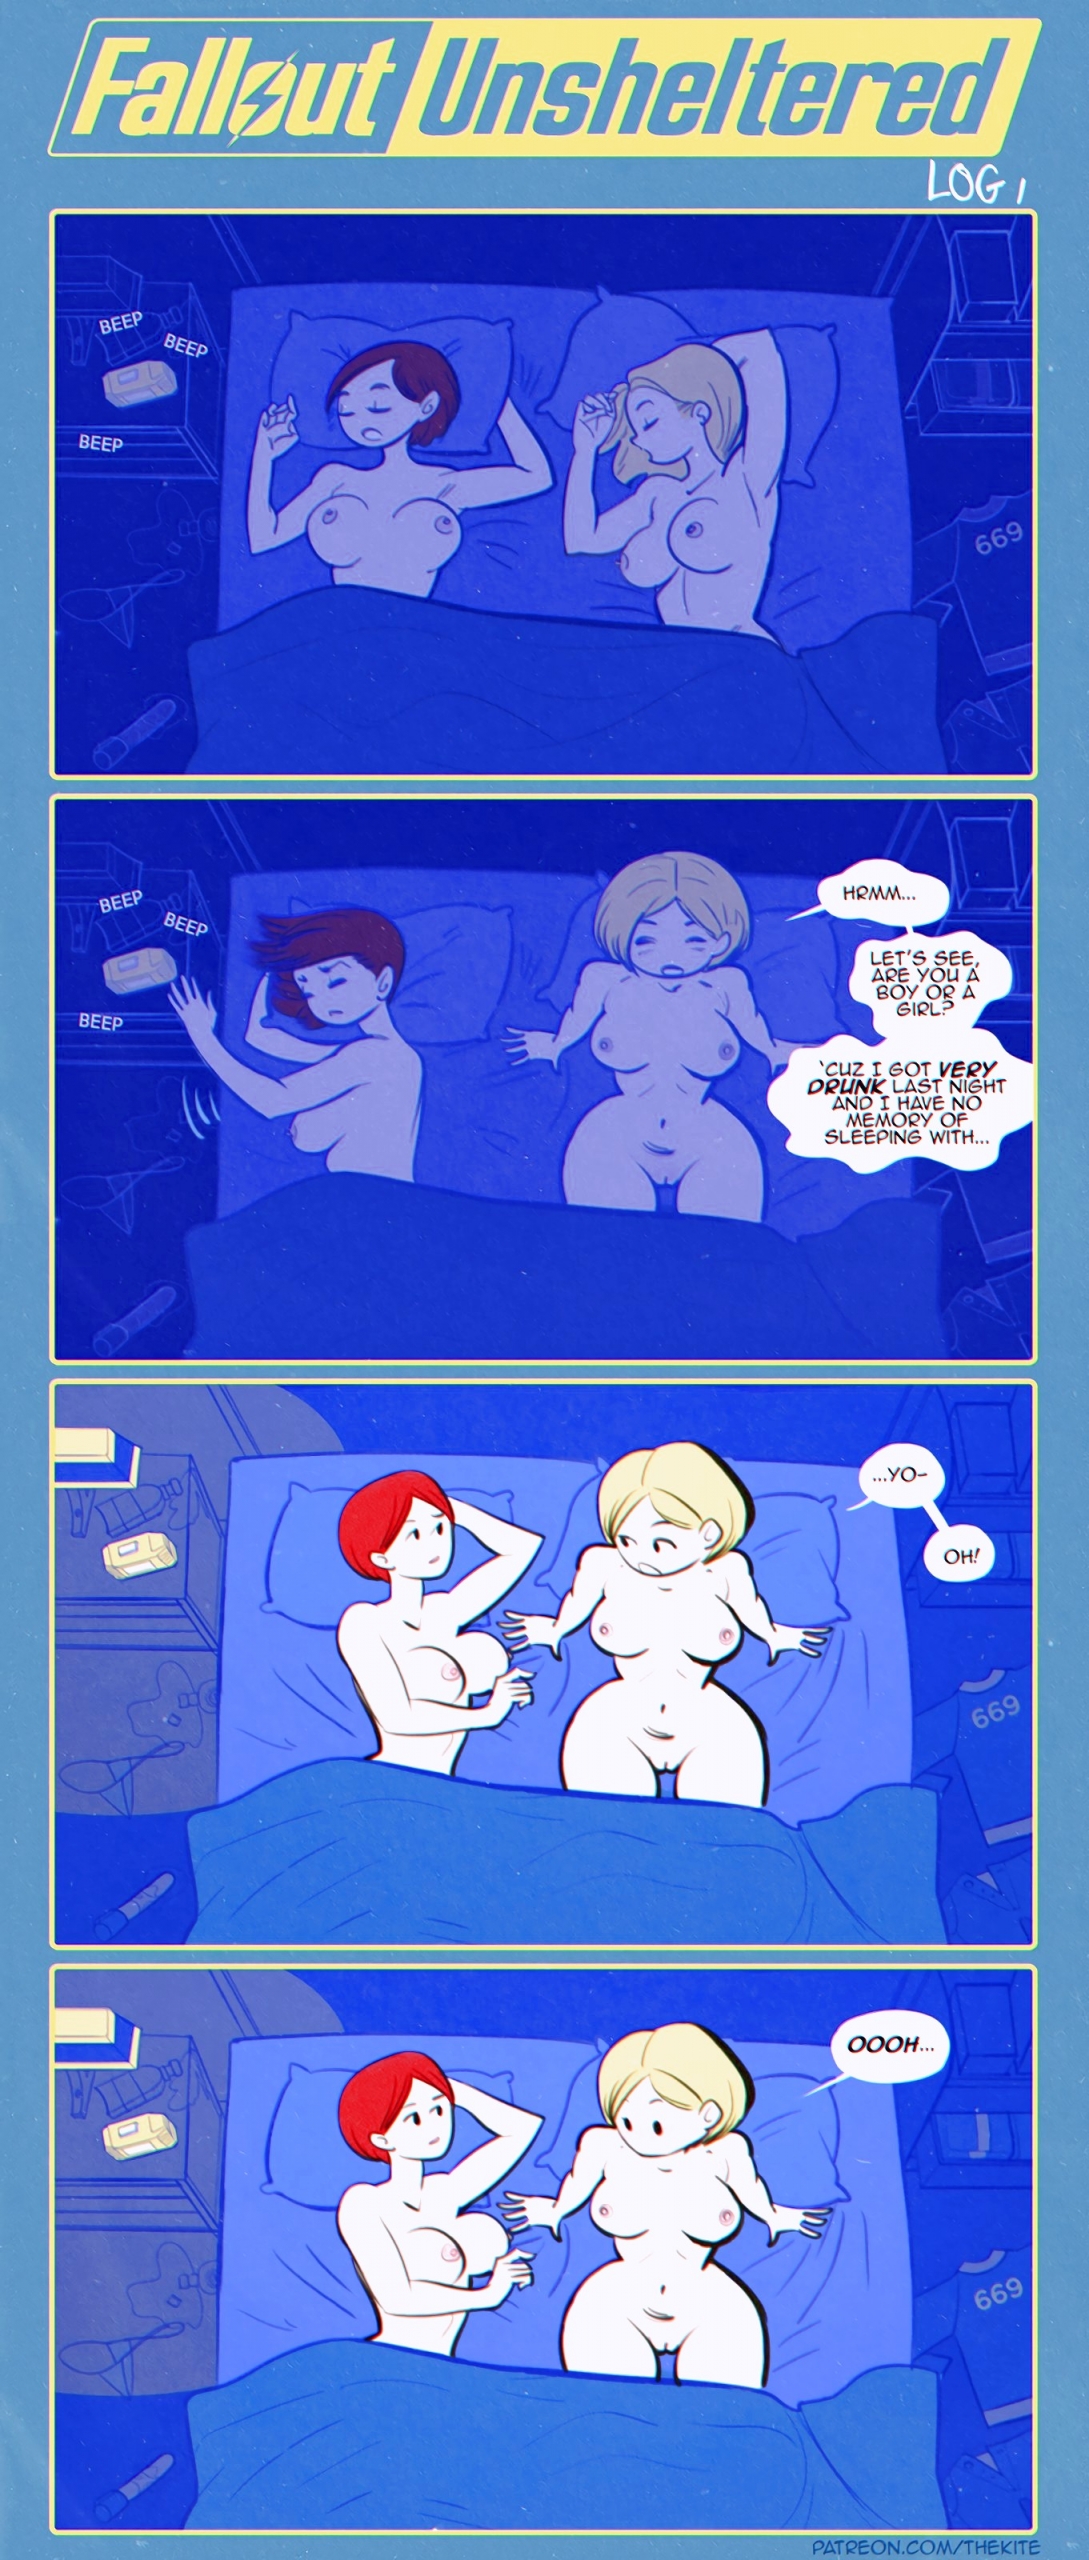 Fallout Unsheltered porn comic page 01 on category Fallout